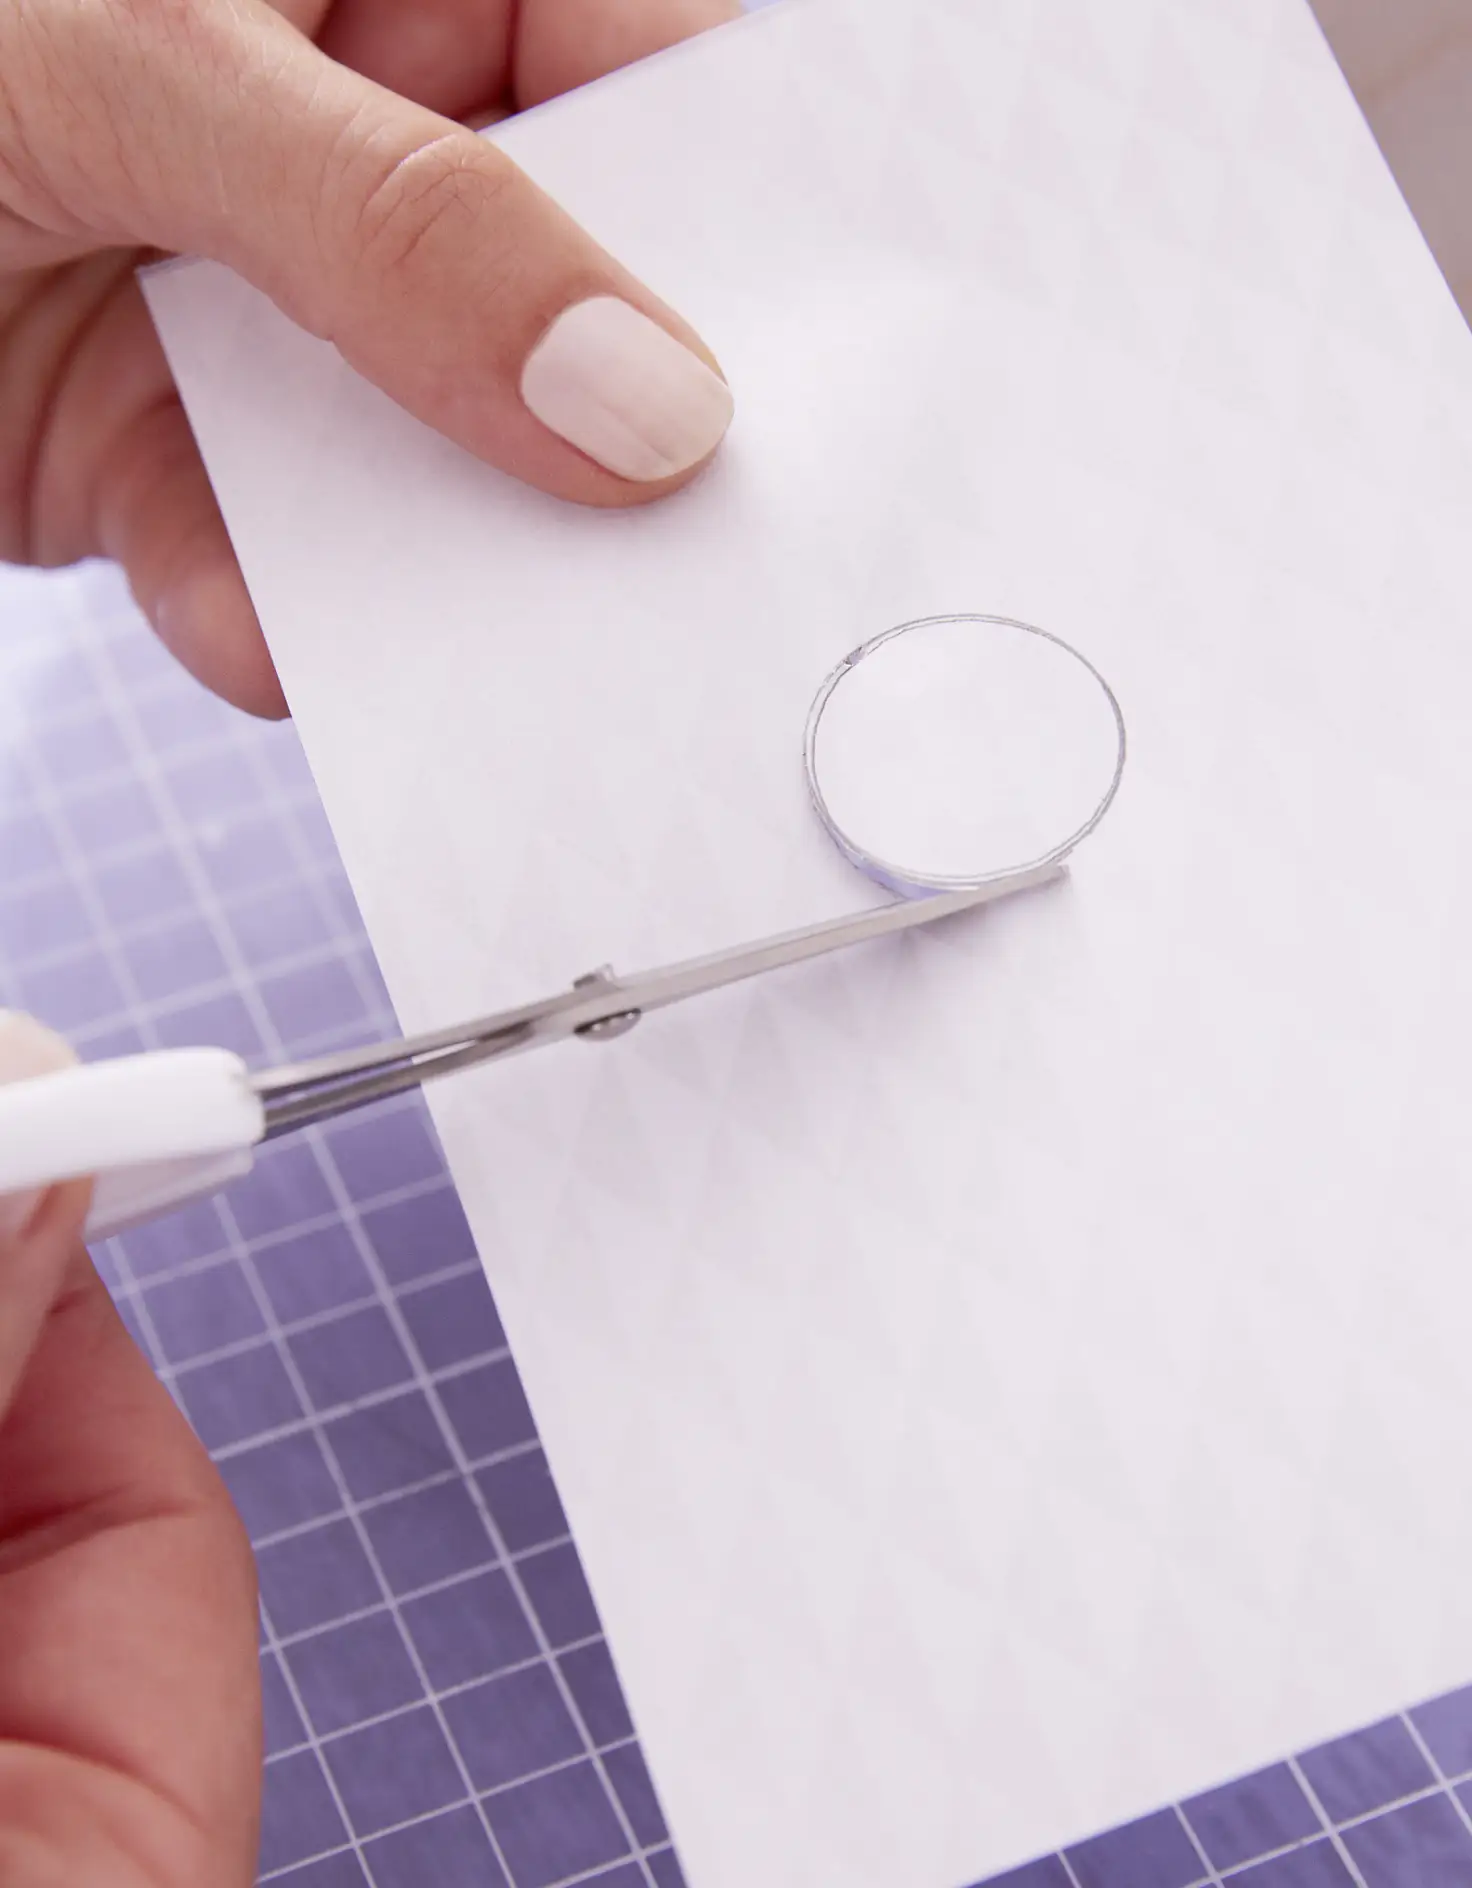 Place the paper on the corresponding surface - transfer holes or cut-outs onto the paper, and cut them out with small scissors.